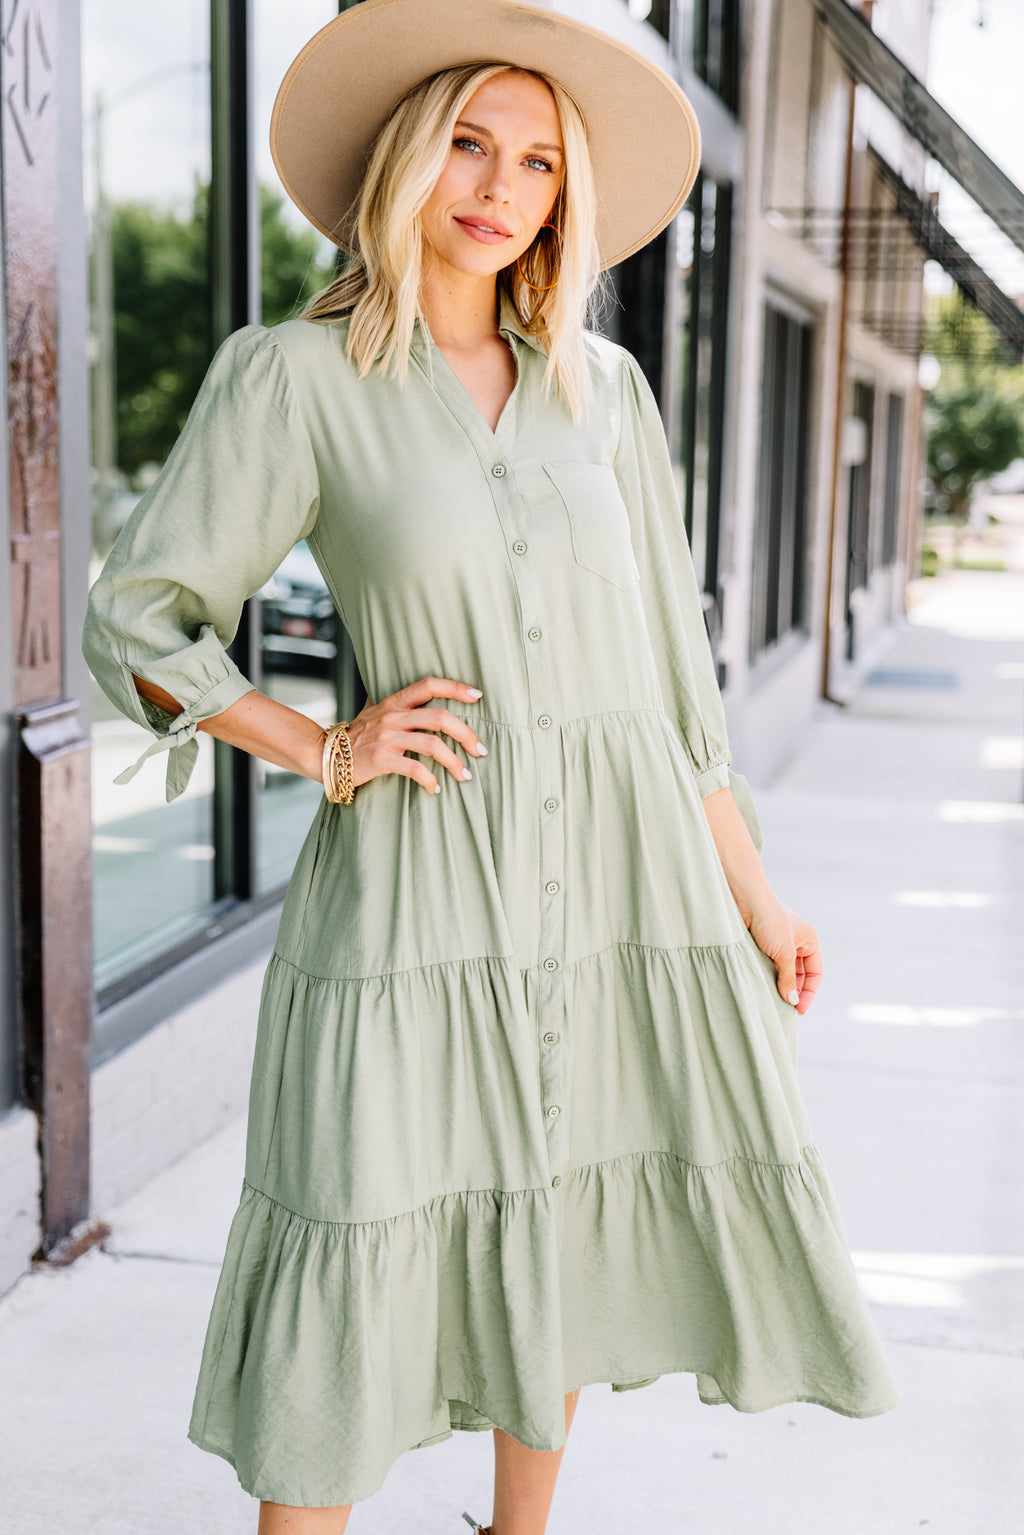 Leading Back To You Sage Green Tiered Midi Dress – Shop The Mint